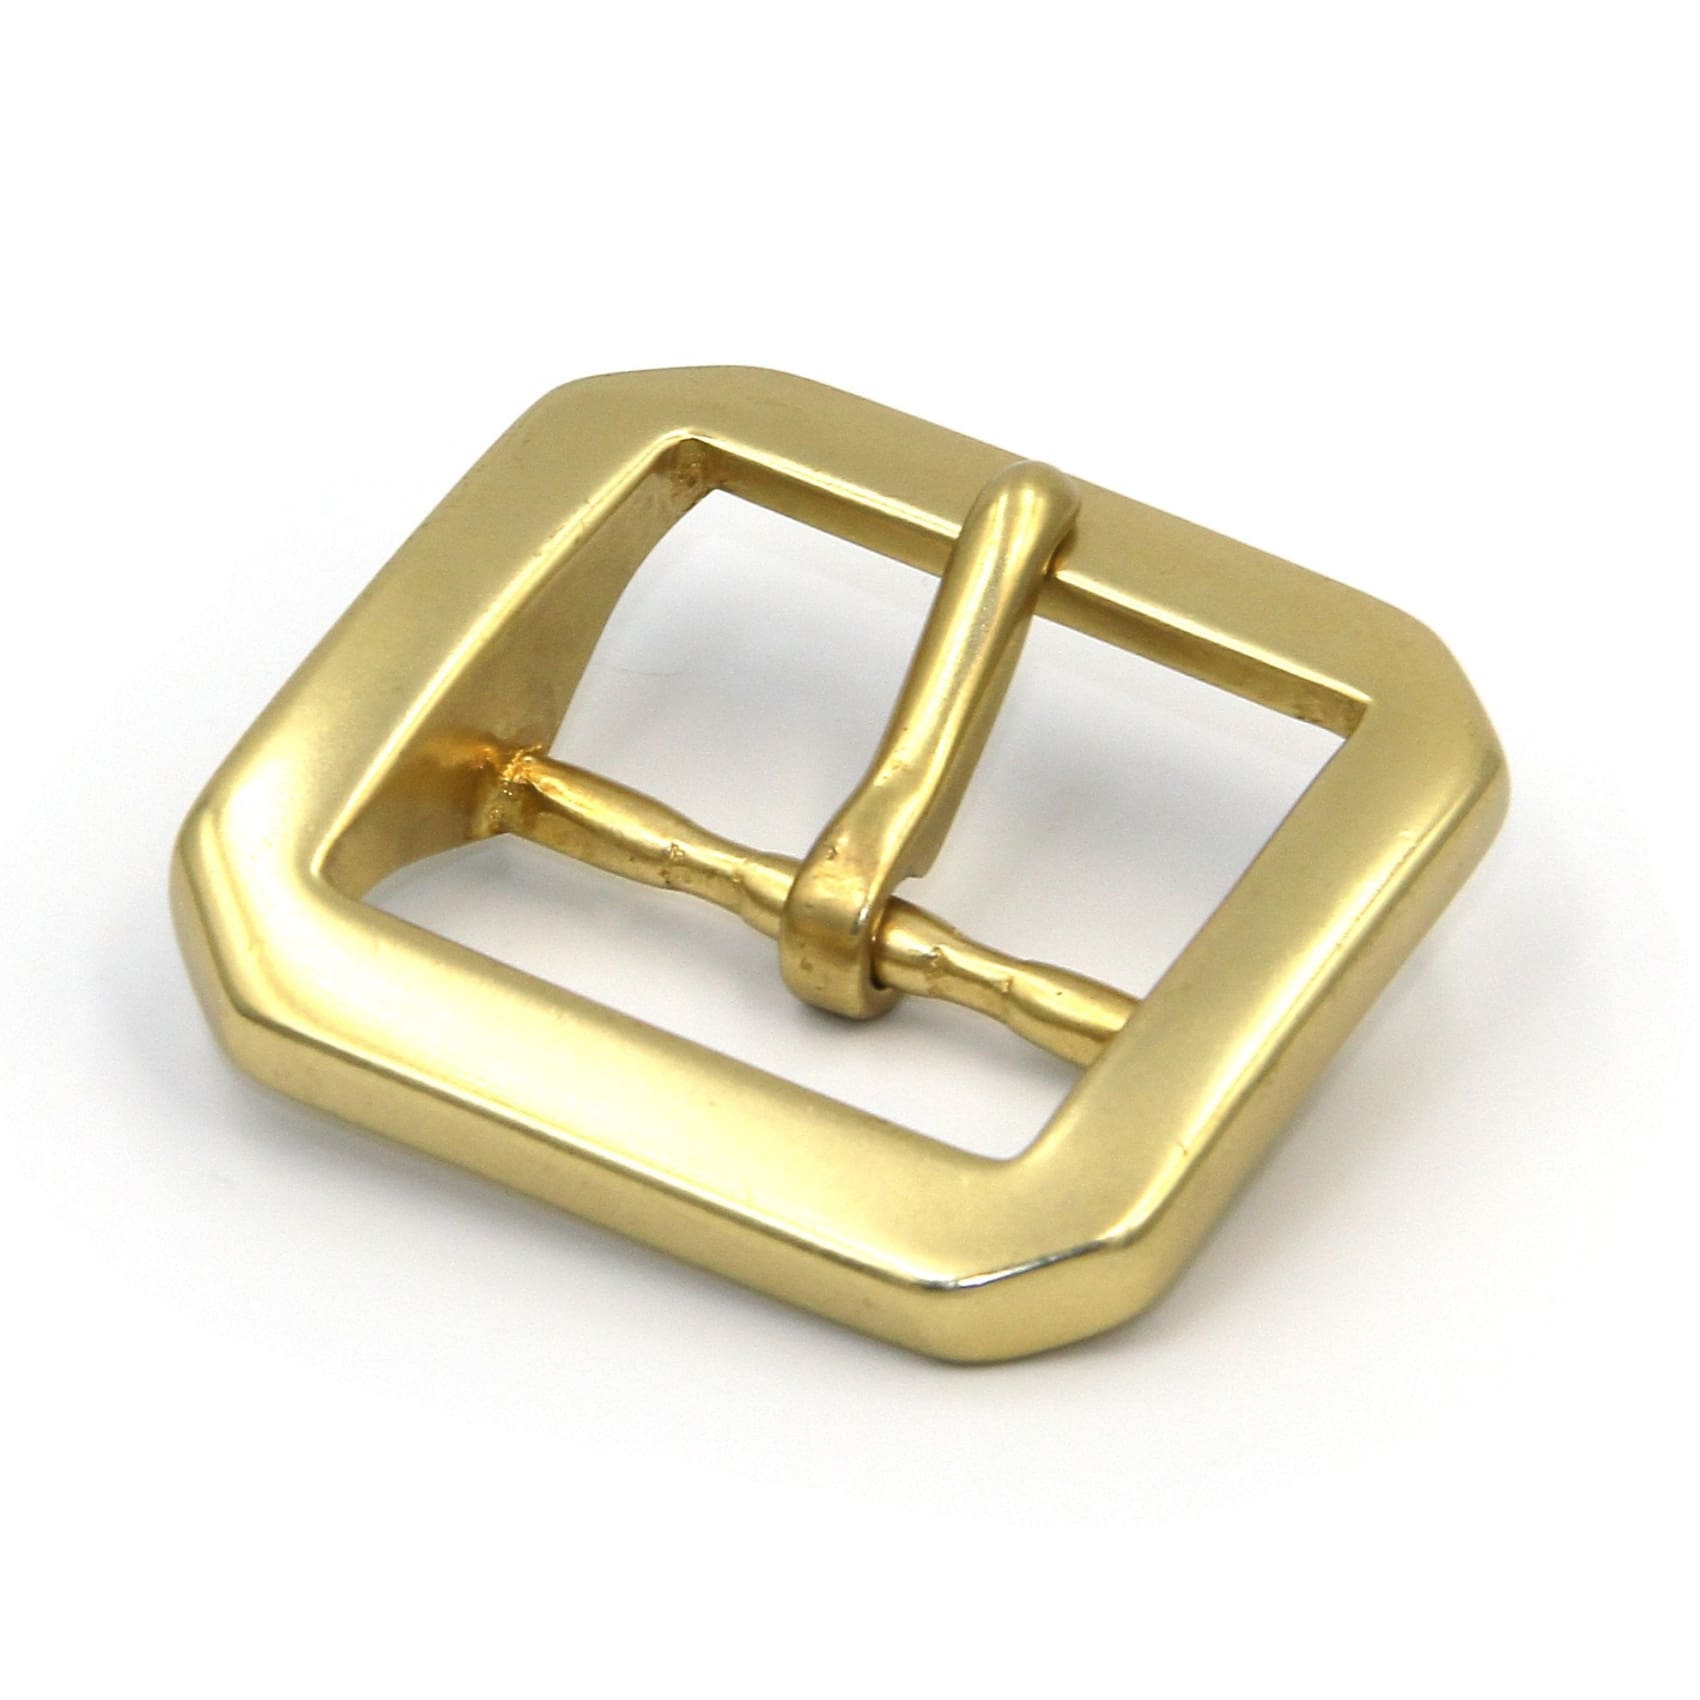 1 3/4 inch Polished Solid Brass Belt Buckle - F1